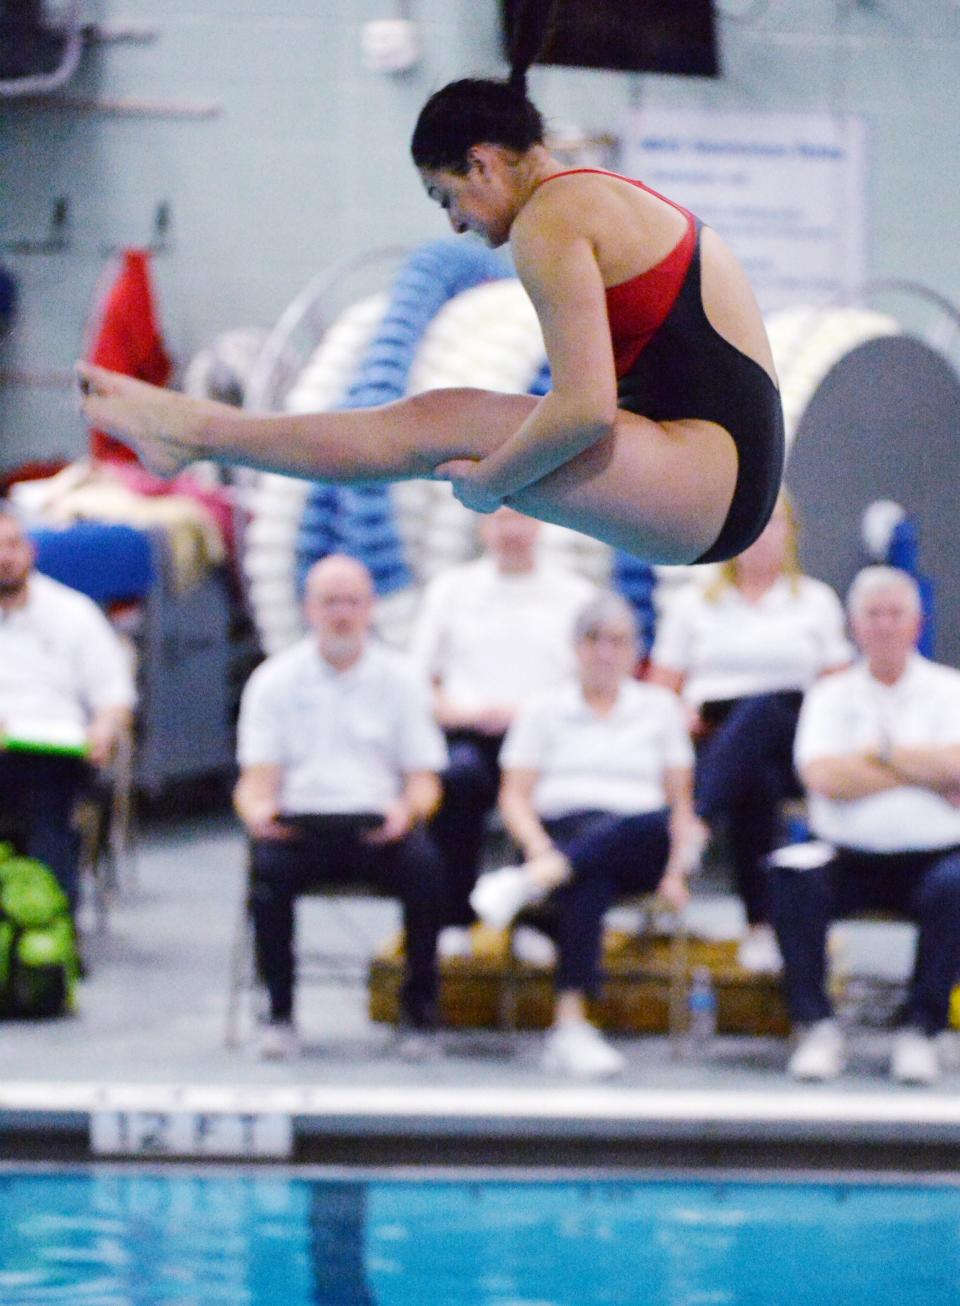 Fairview's Elena Veres competes in the girls District 10 Class 2A diving championships at McDowell High School in Millcreek Township on Feb. 24, 2023. Veres won the event with 255.25 points.